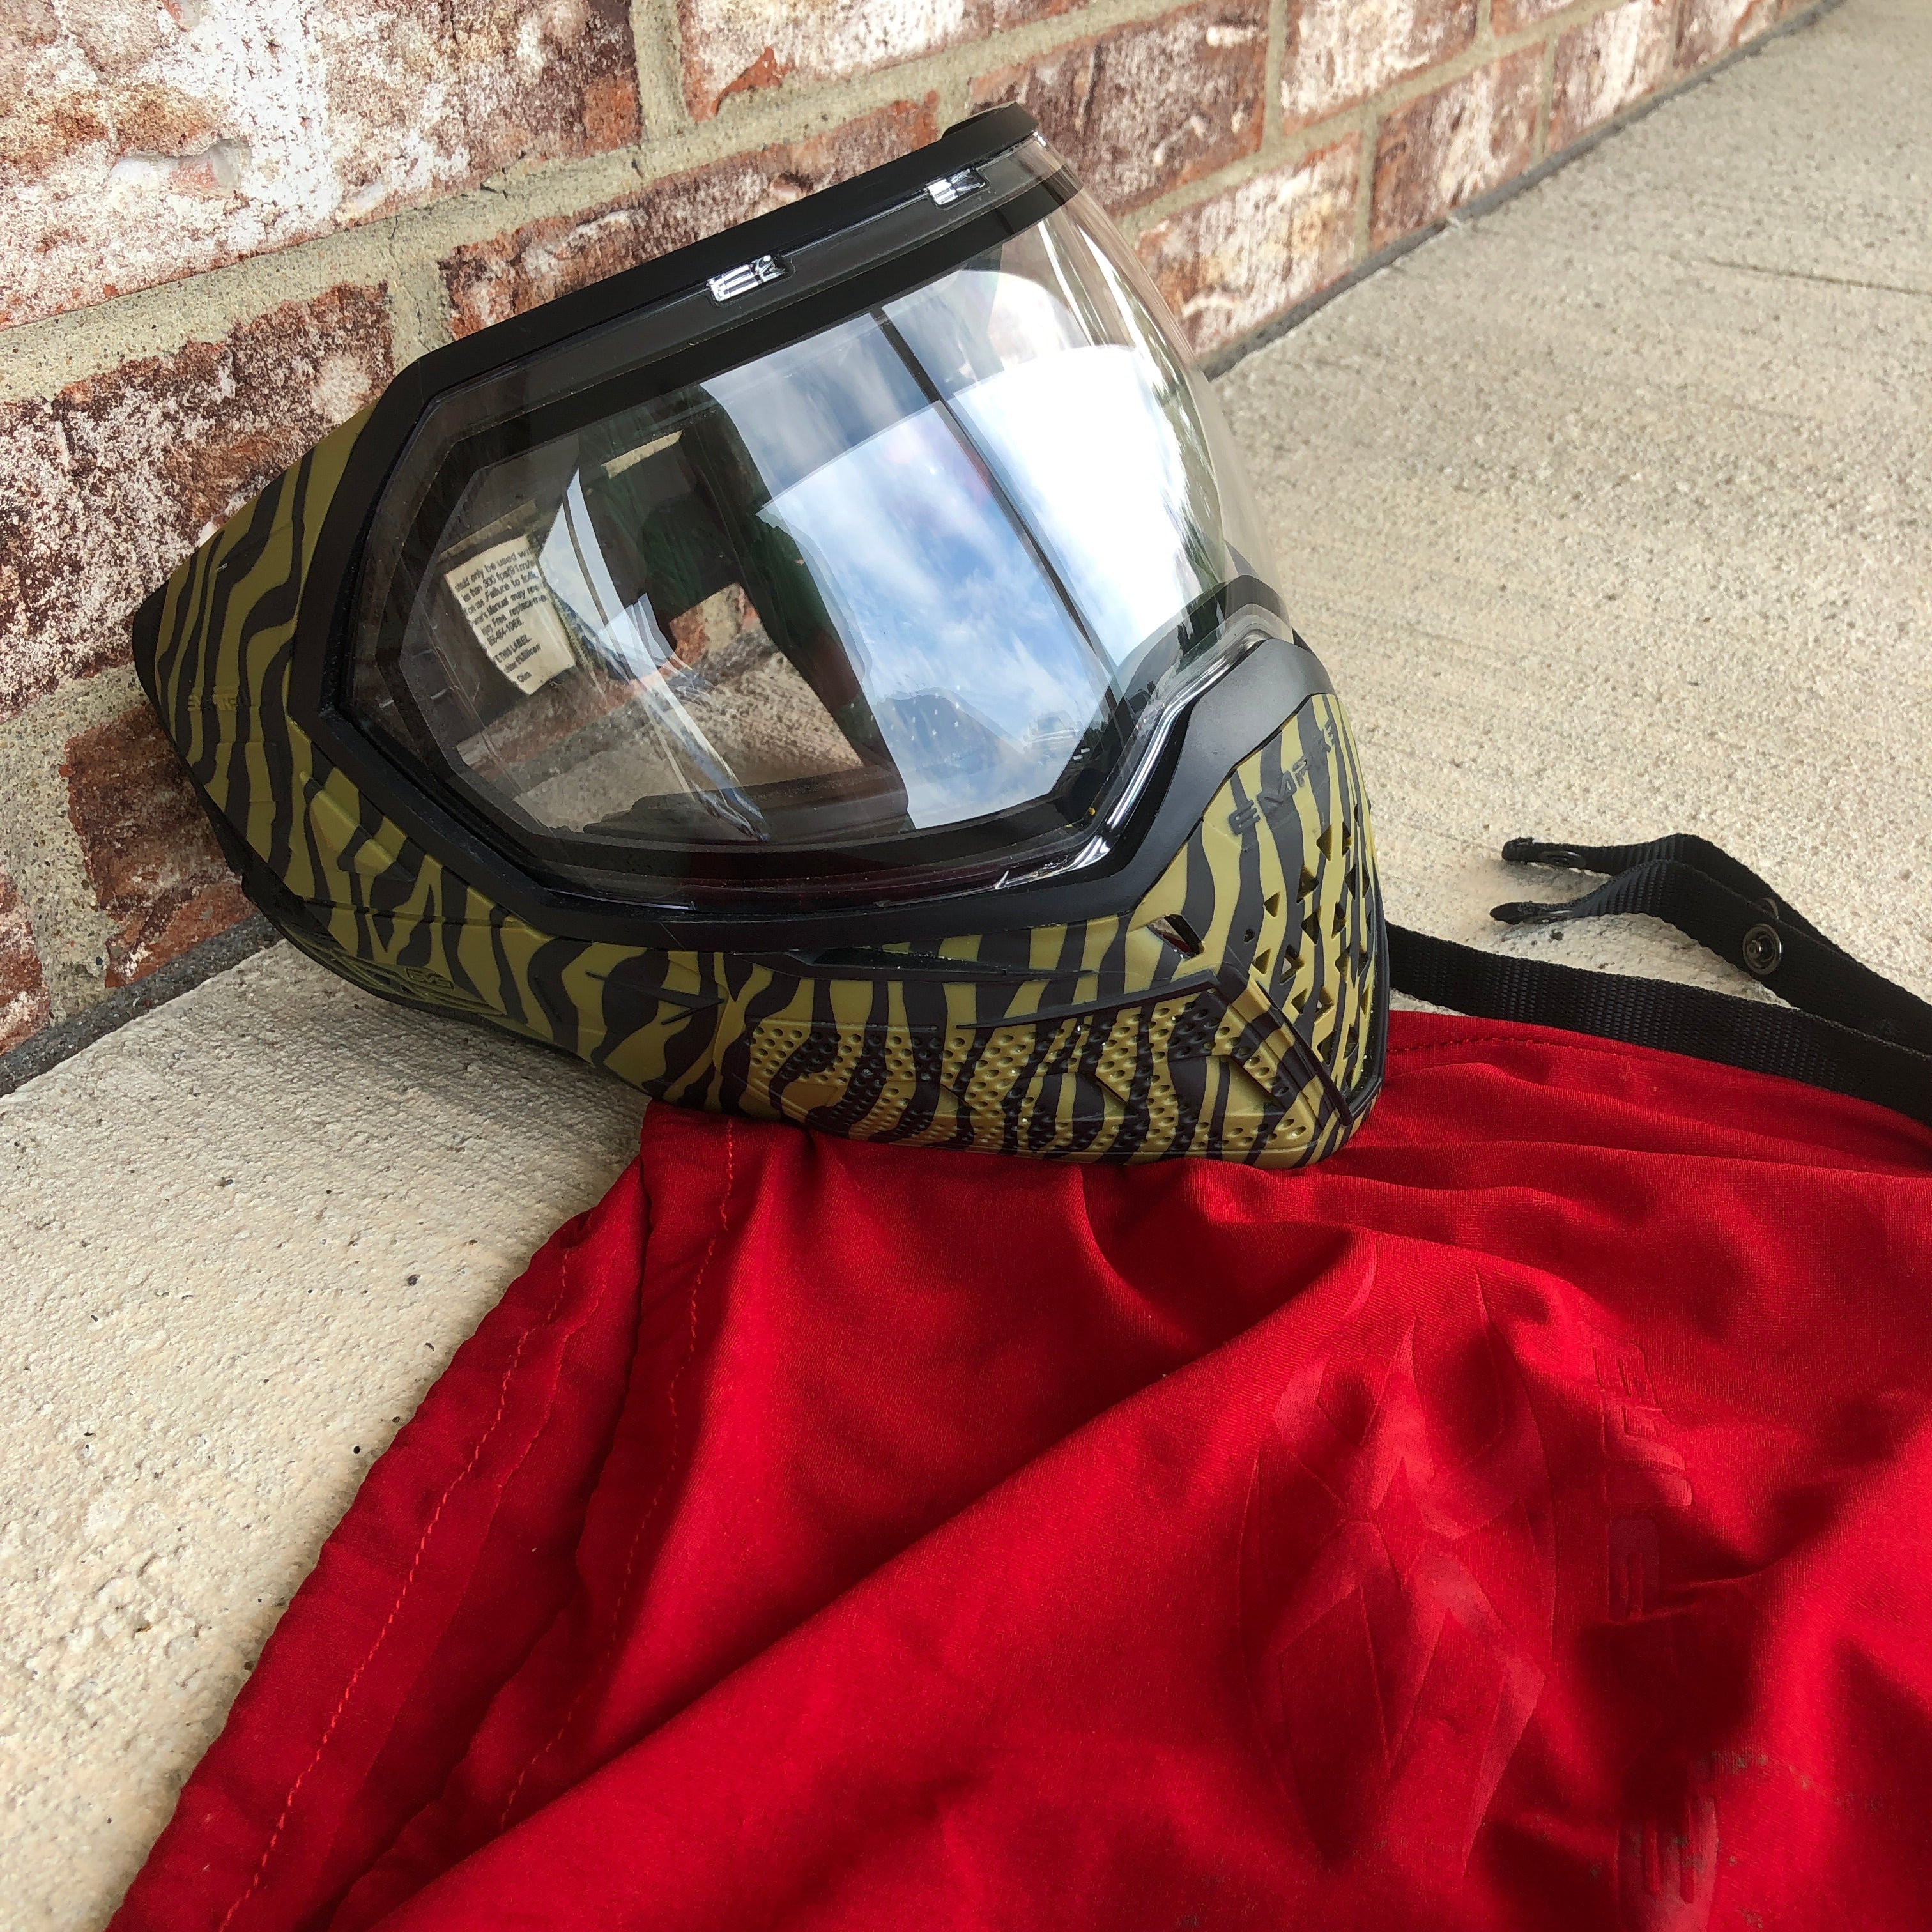 Used Empire EVS Paintball Mask - Tigerstripe